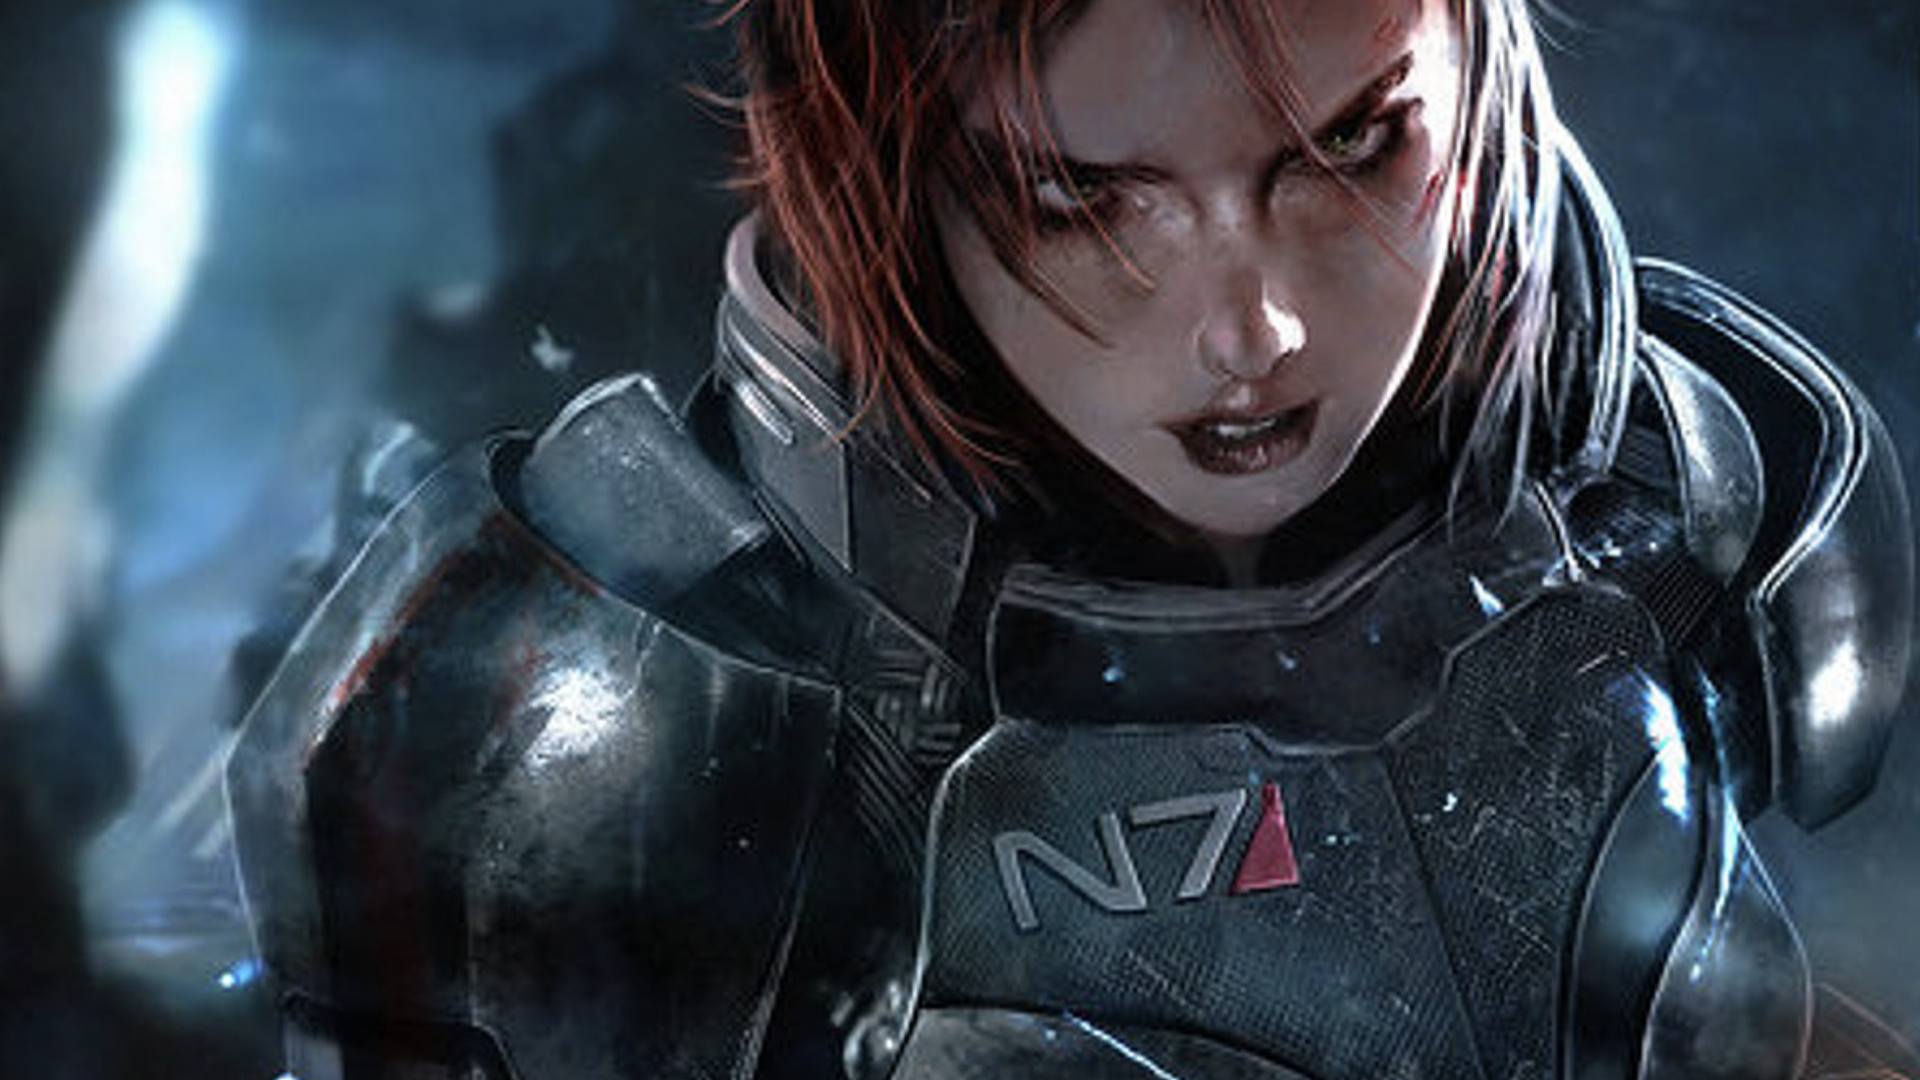 Image from Mass Effect III